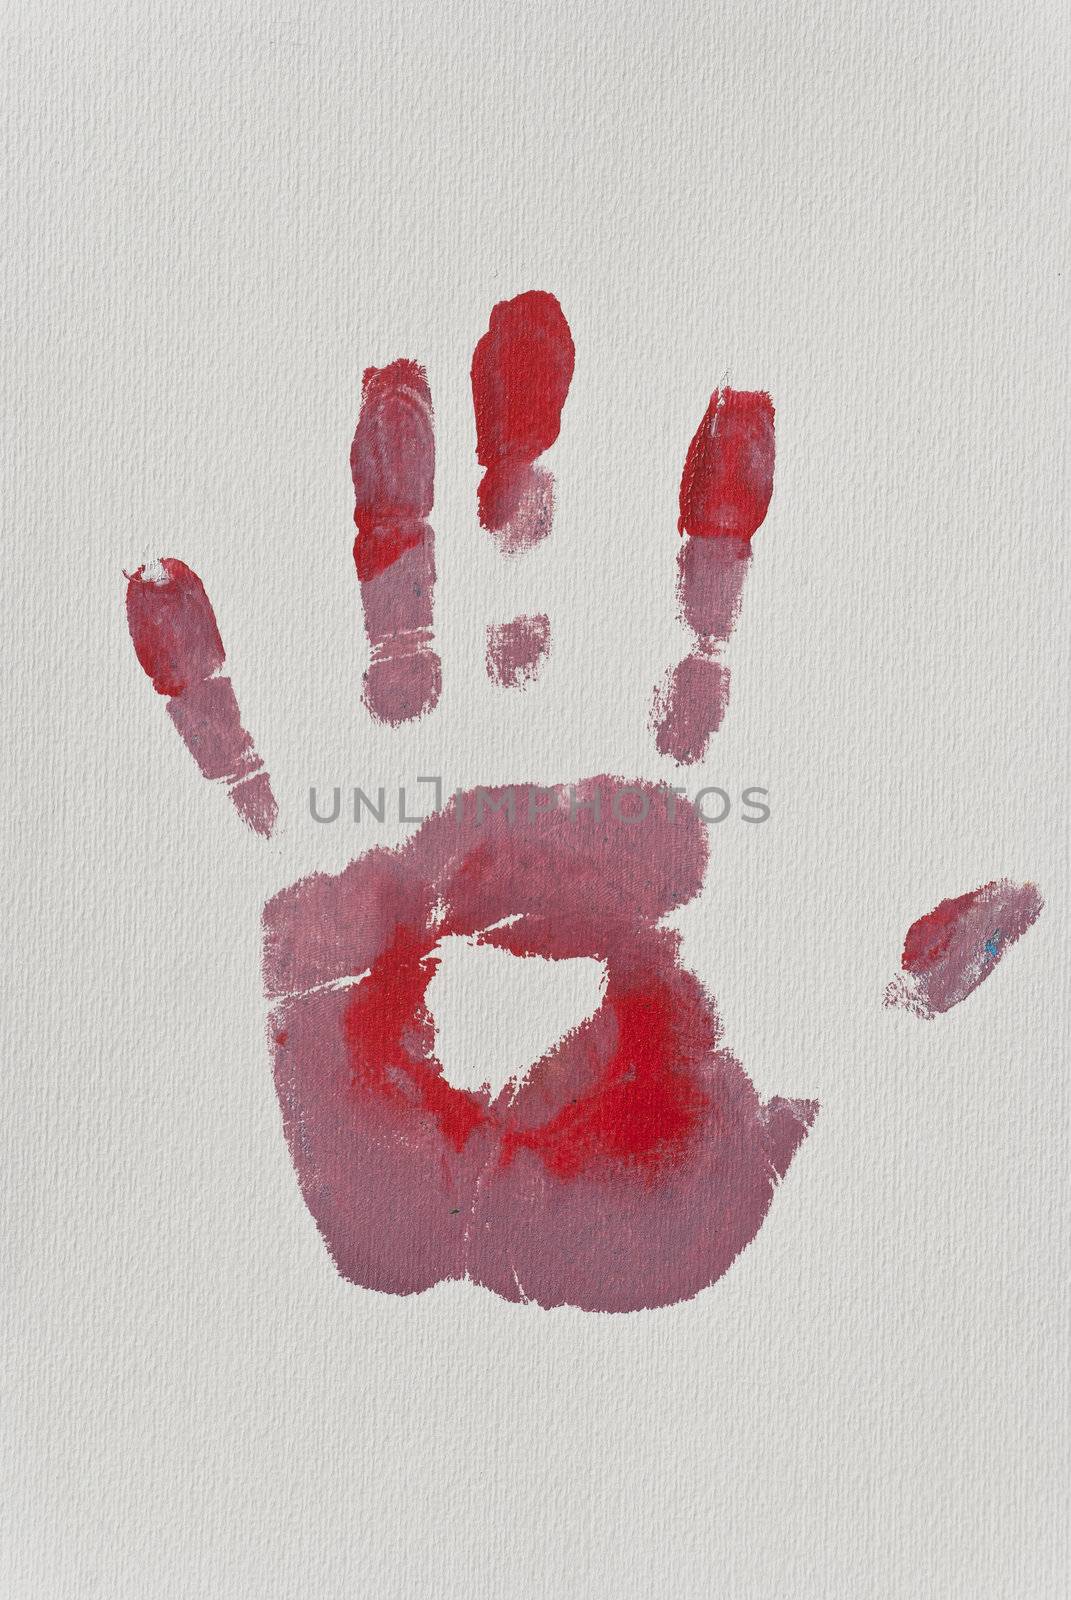 Pink and Red Left Hand-print on Textured Paper